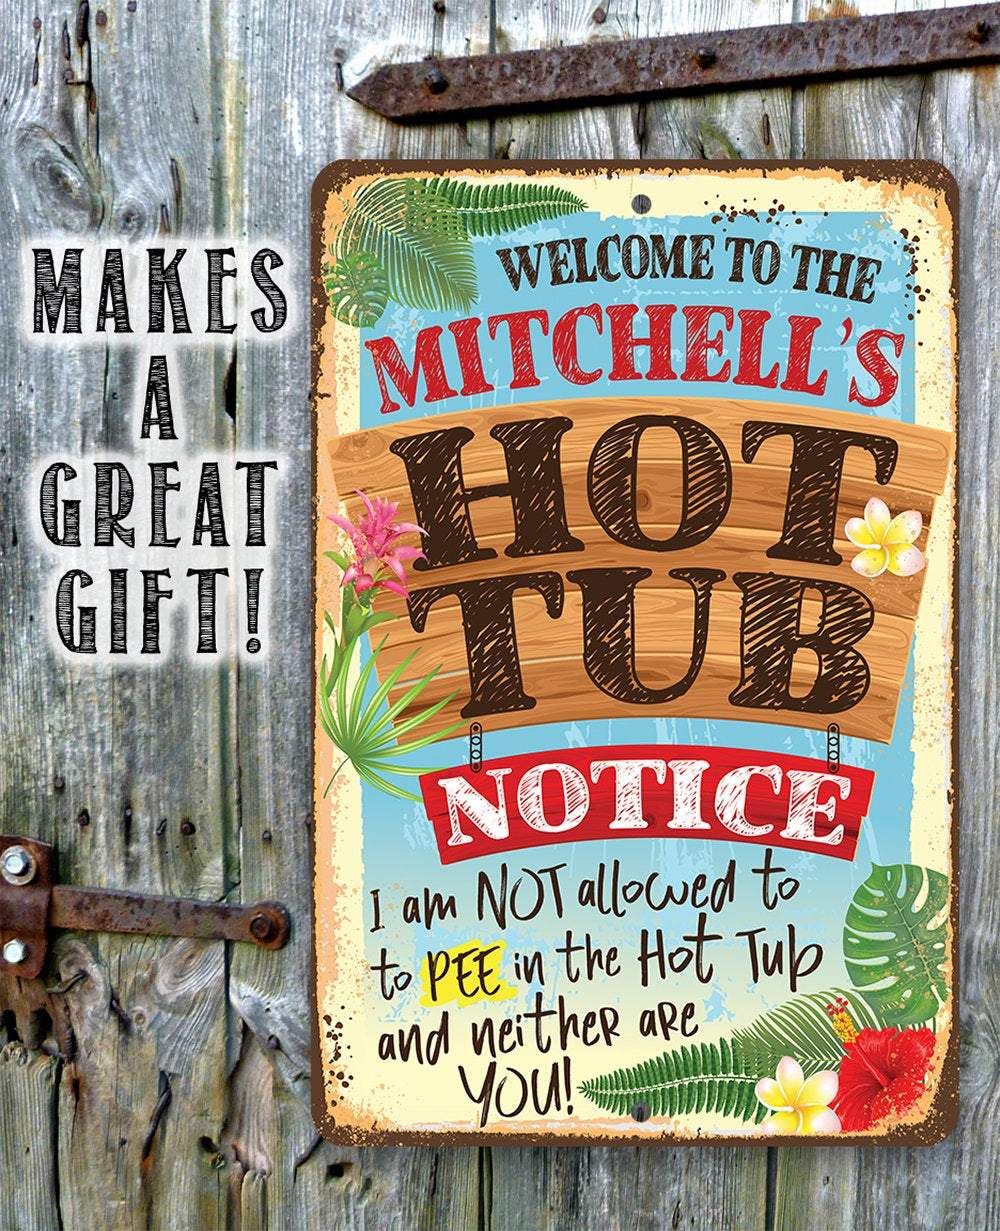 Personalized - Notice No Pee In Hot Tub - Metal Sign | Lone Star Art.